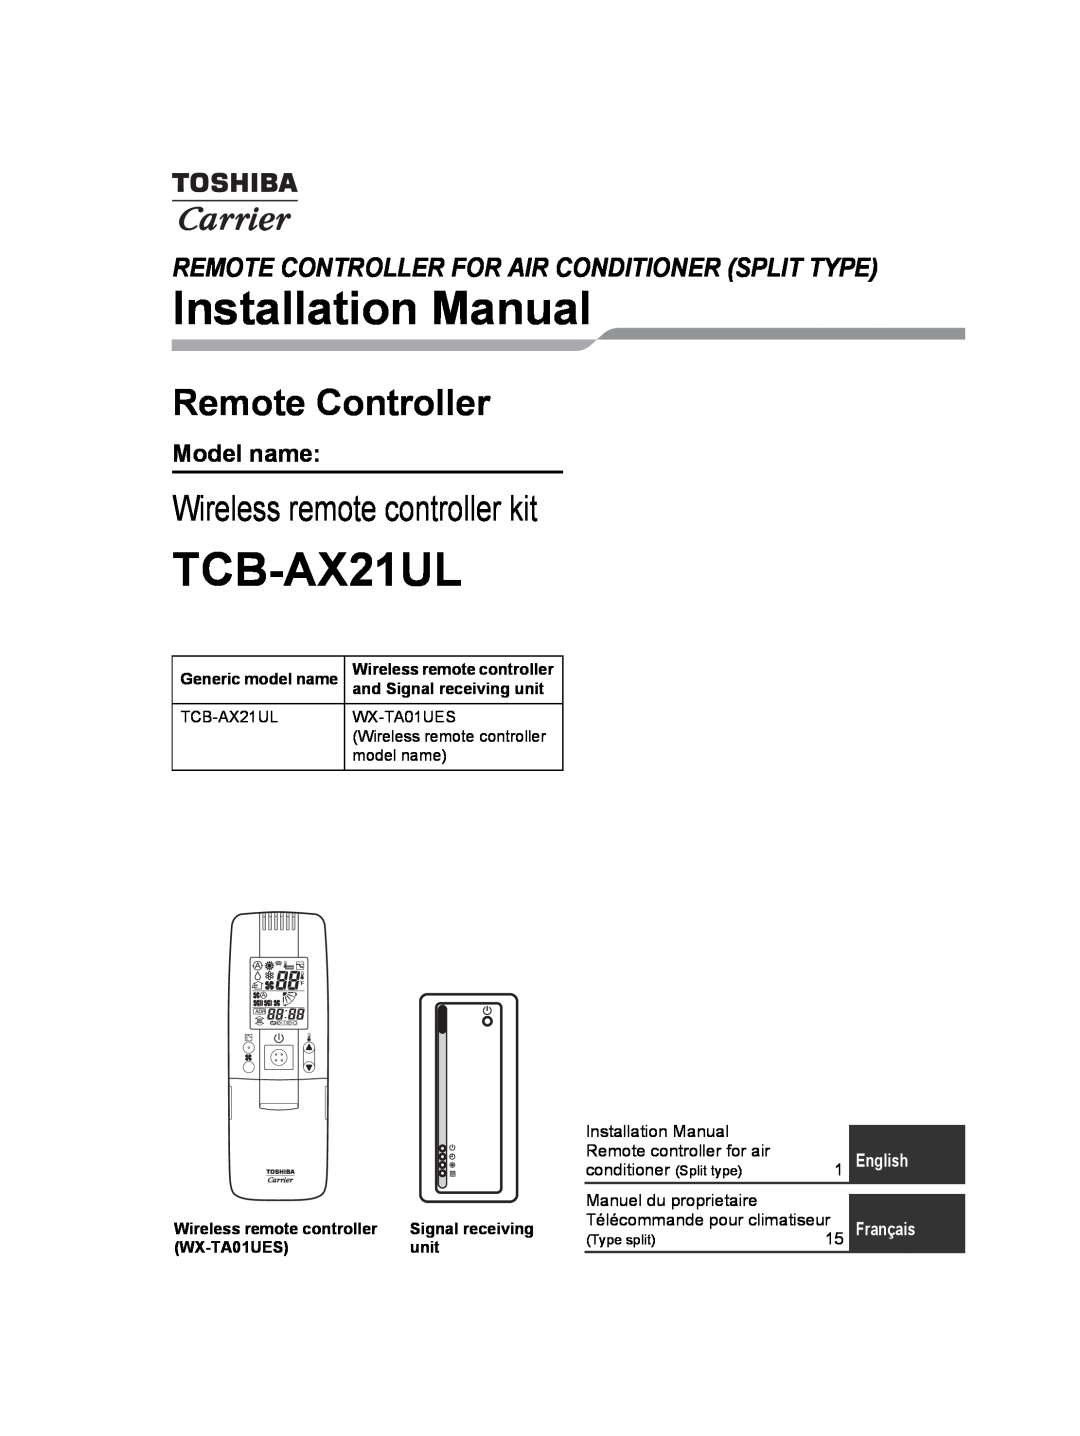 Toshiba TCB-AX21UL installation manual Model name, Installation Manual, Remote Controller, Wireless remote controller kit 